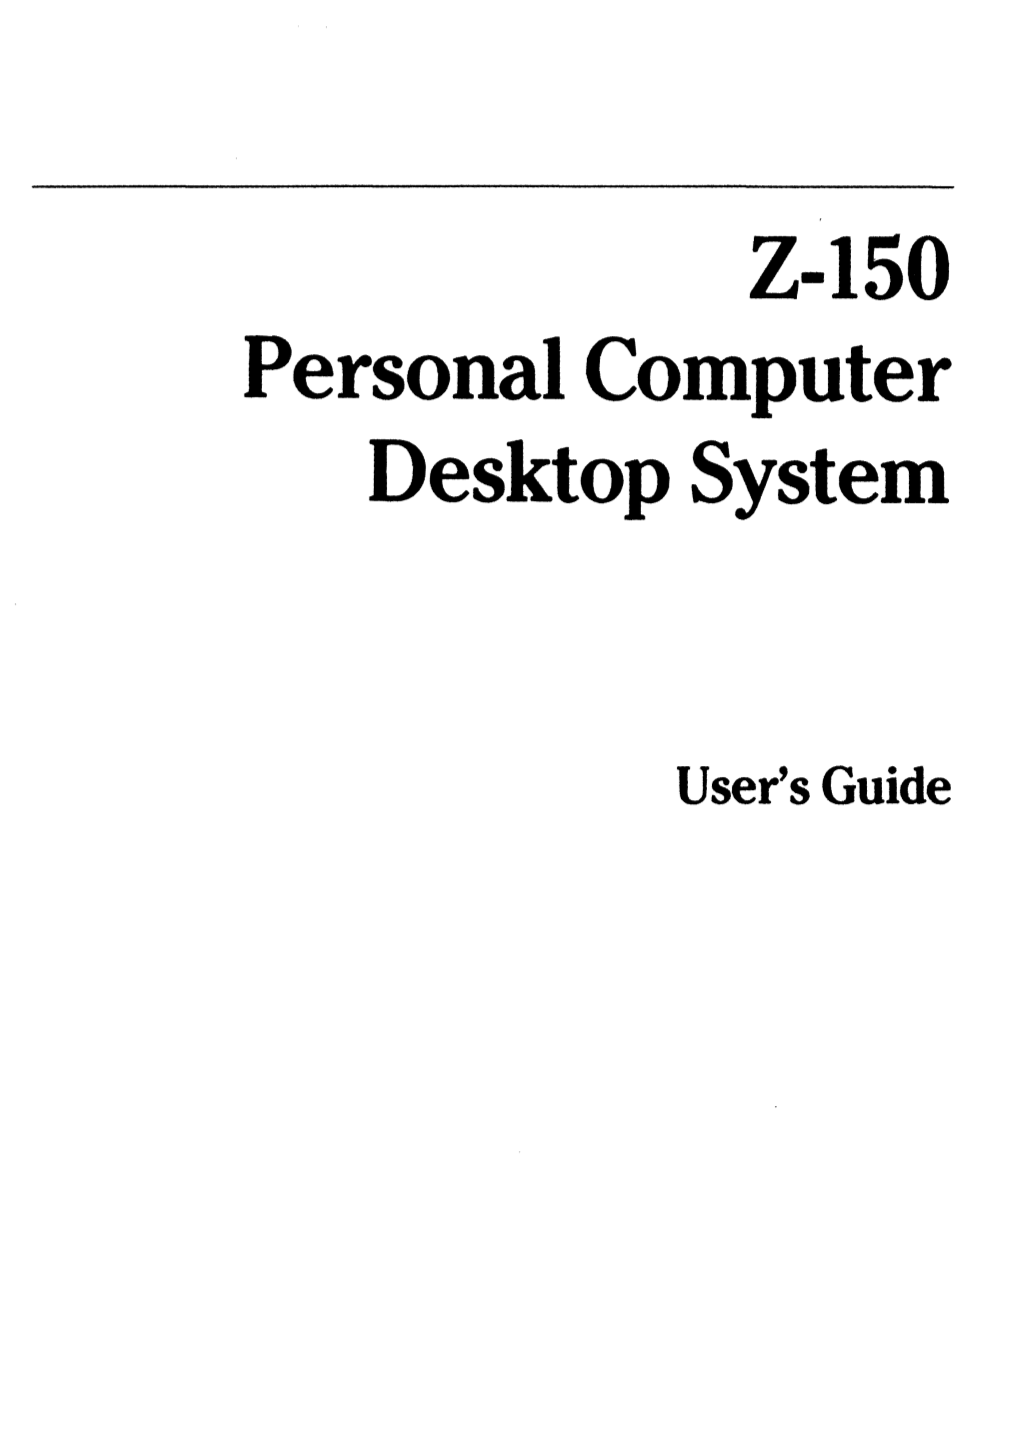 Zenith Z-150 PC Users and Operations Manual Guide.Pdf